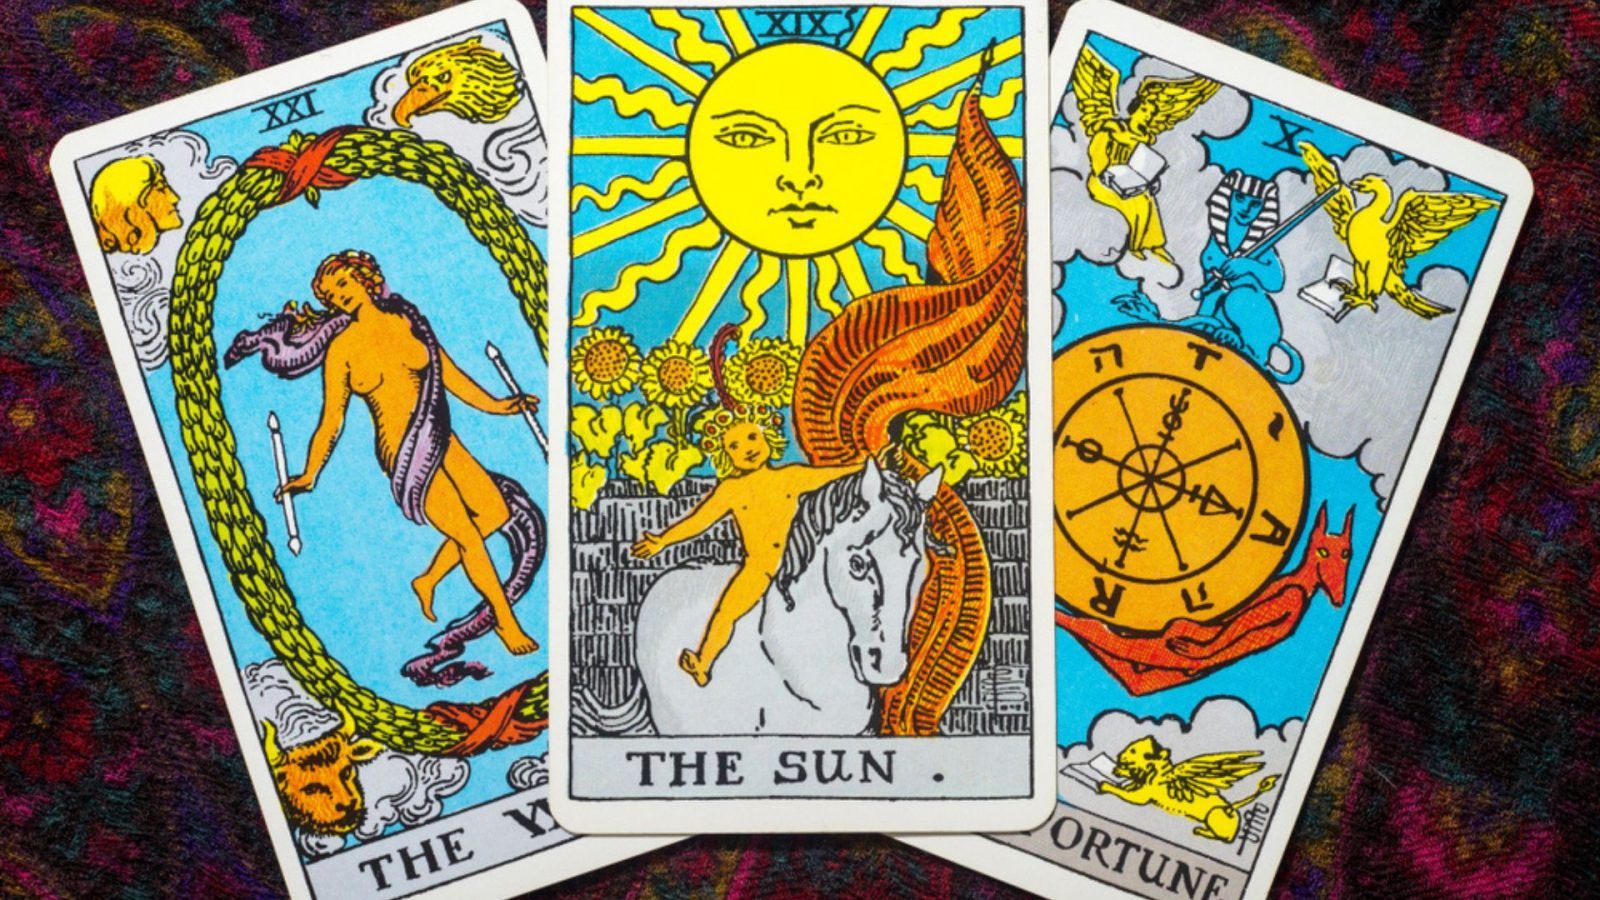 Tarot Card Reading: What is it and how can you do it?